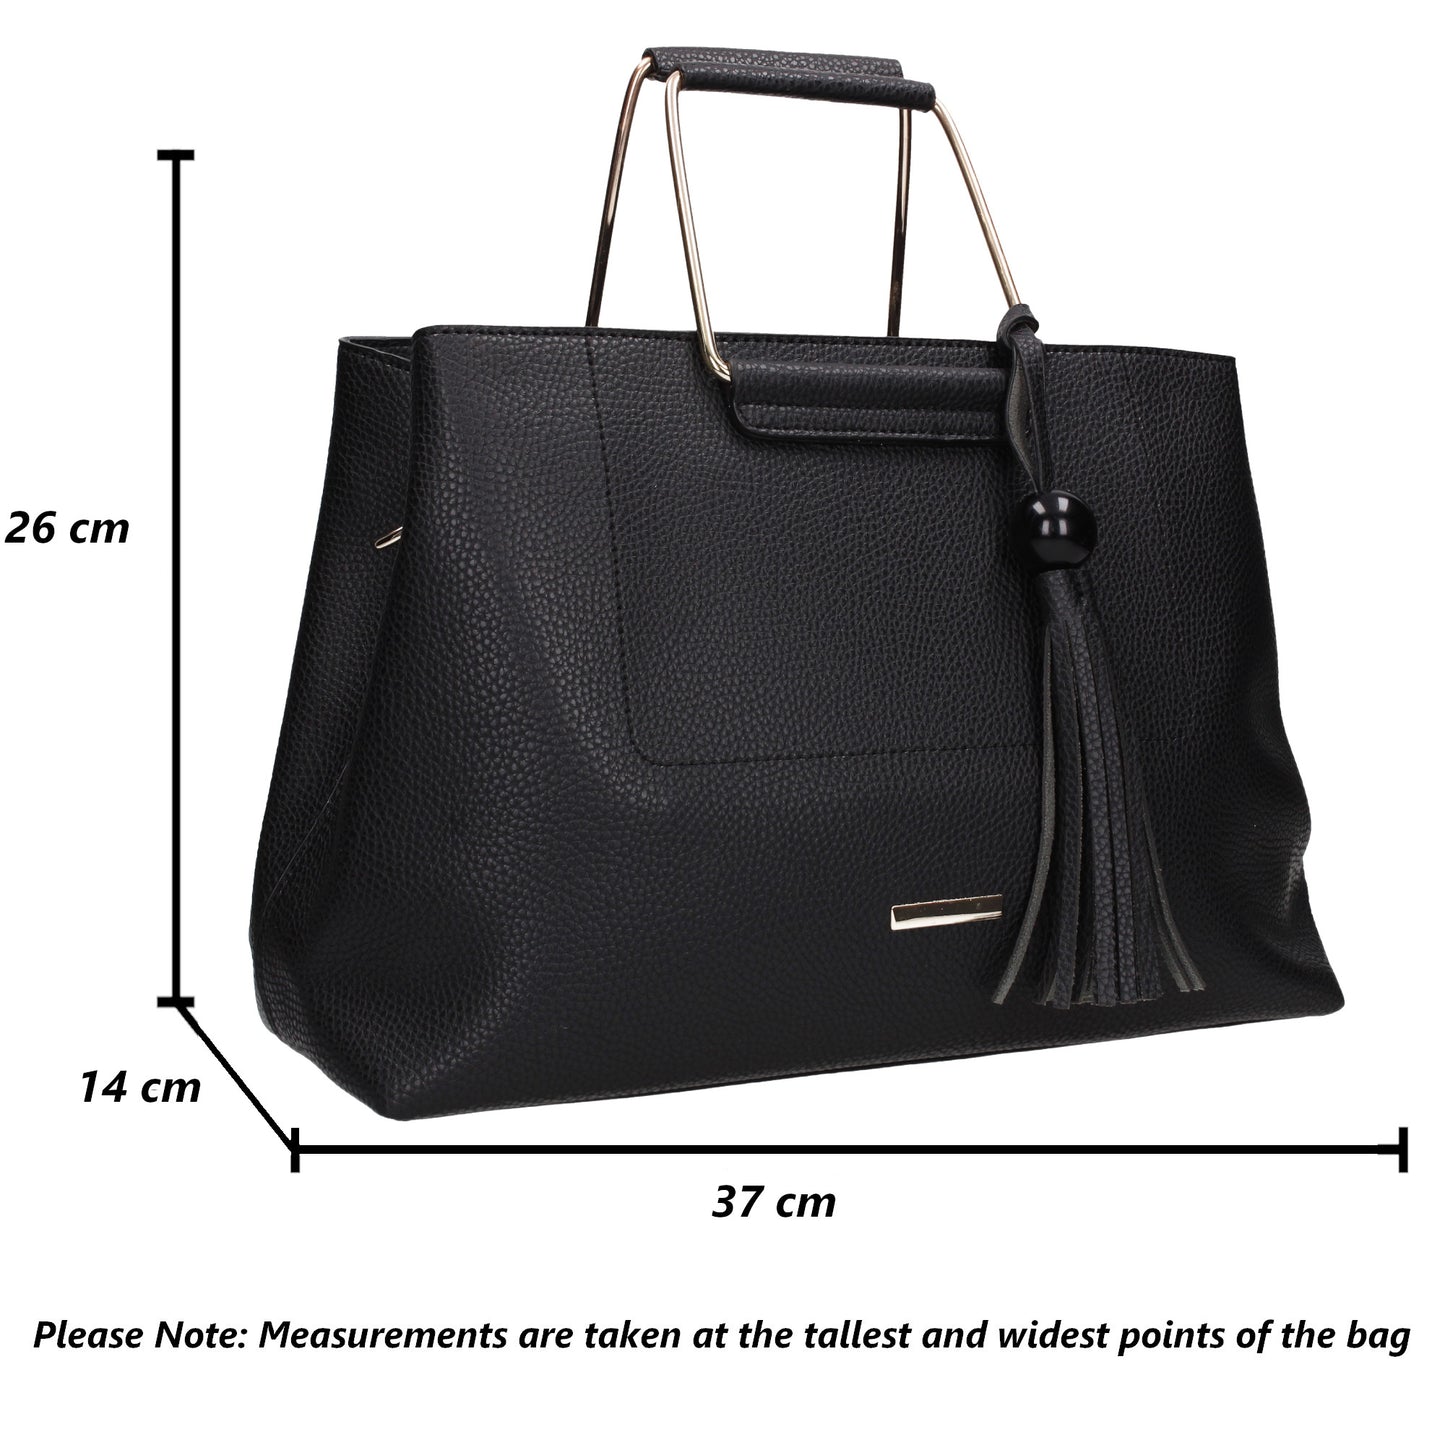 Buy your Amira Handbag Black Today! Buy with confidence from Swankyswans